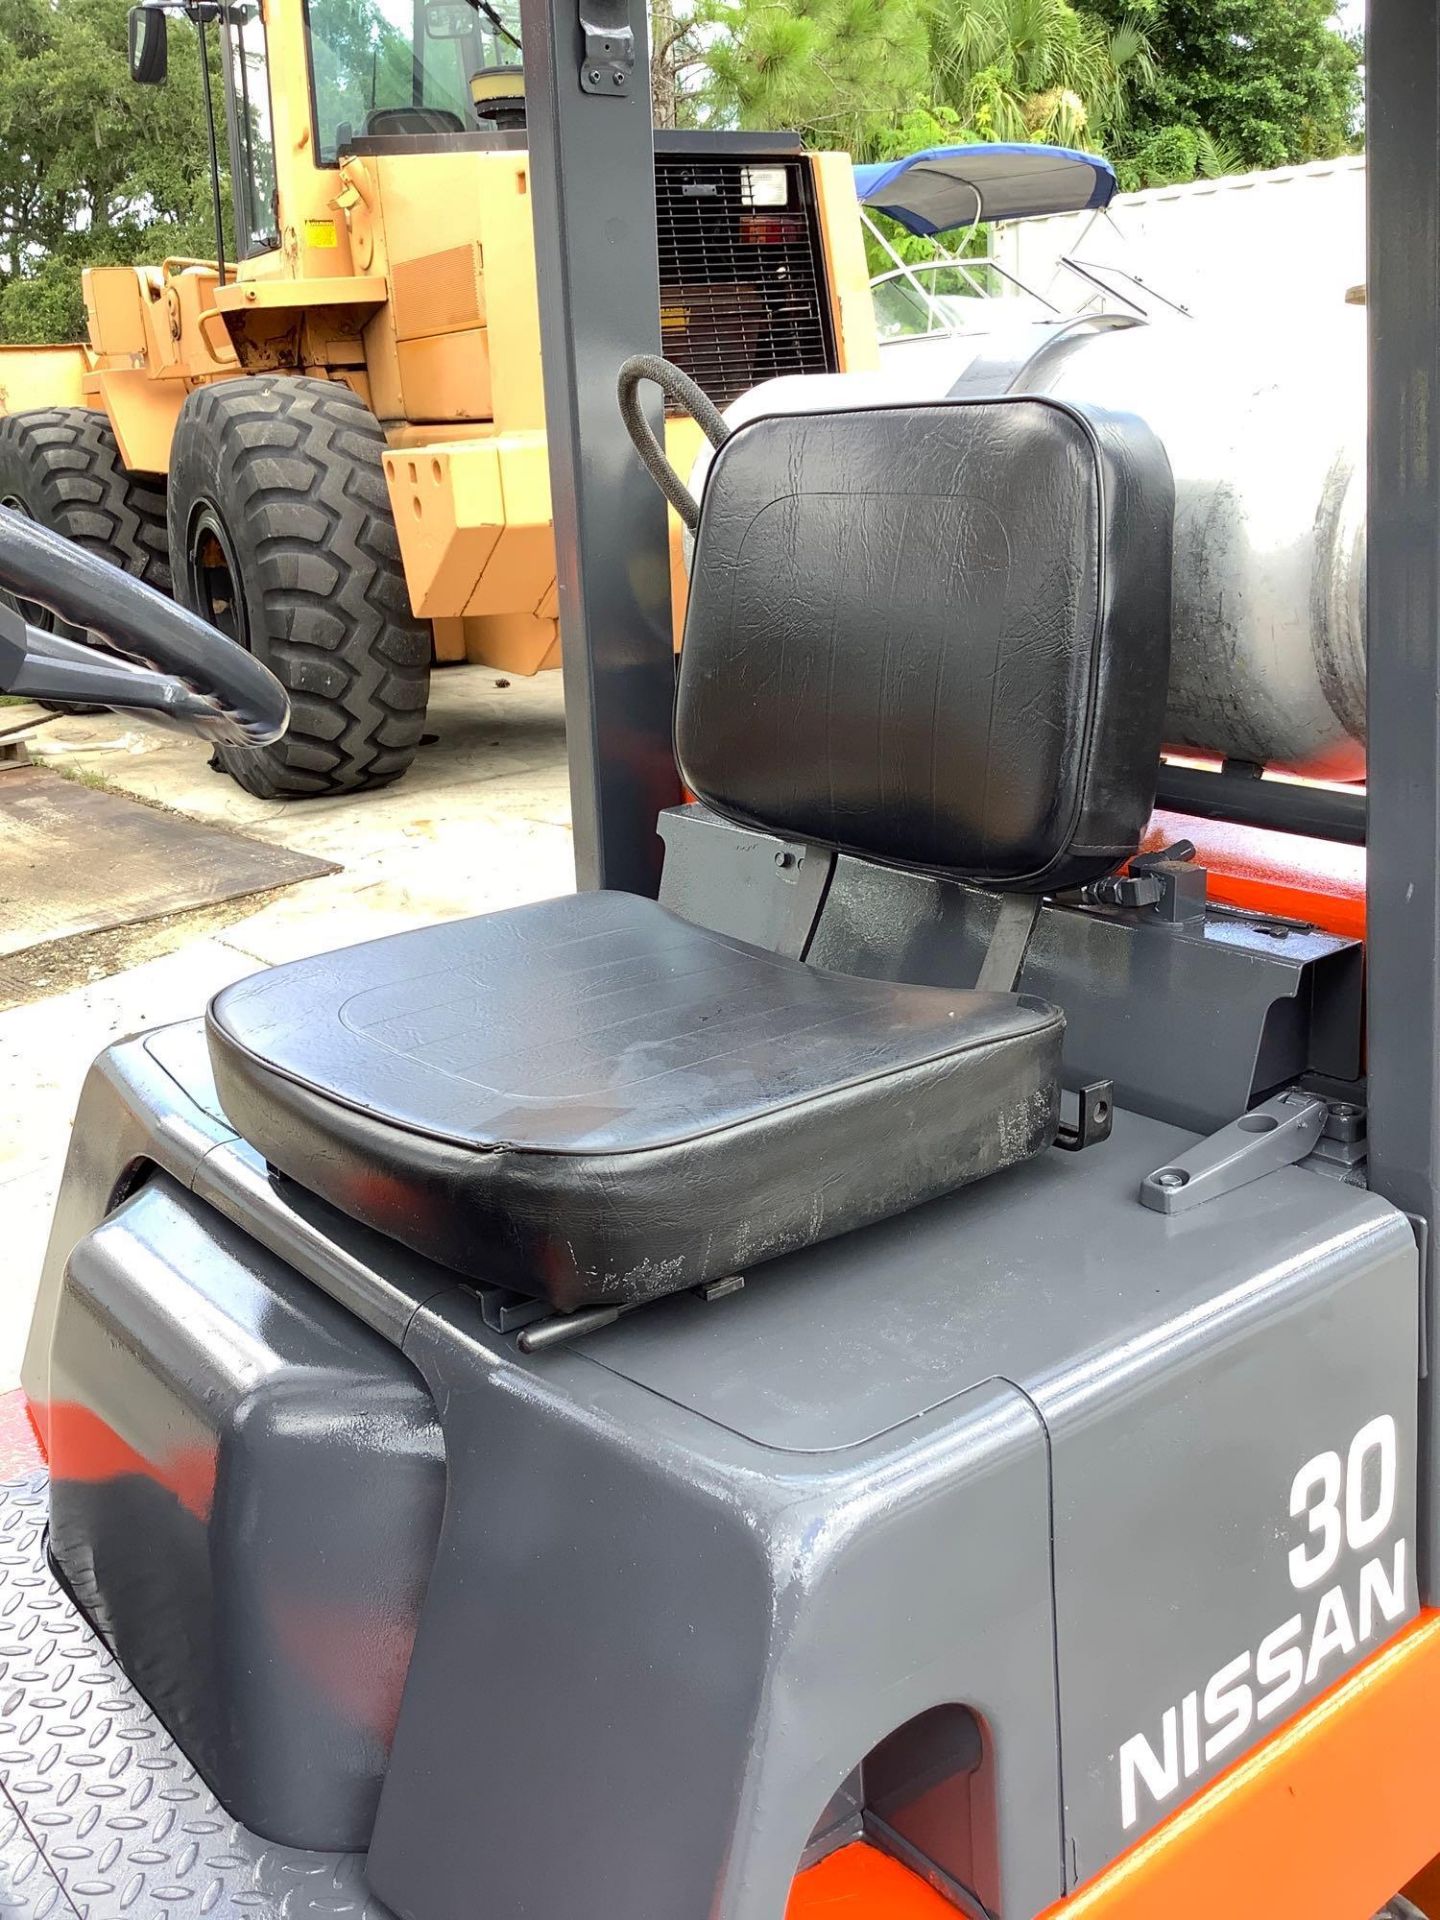 NISSAN OPTIMUM 30 FORKLIFT MODEL CPJ01A15PV, LP POWERED, APPROX MAX CAPACITY 3000LBS, APPROX MAX HEI - Image 13 of 17